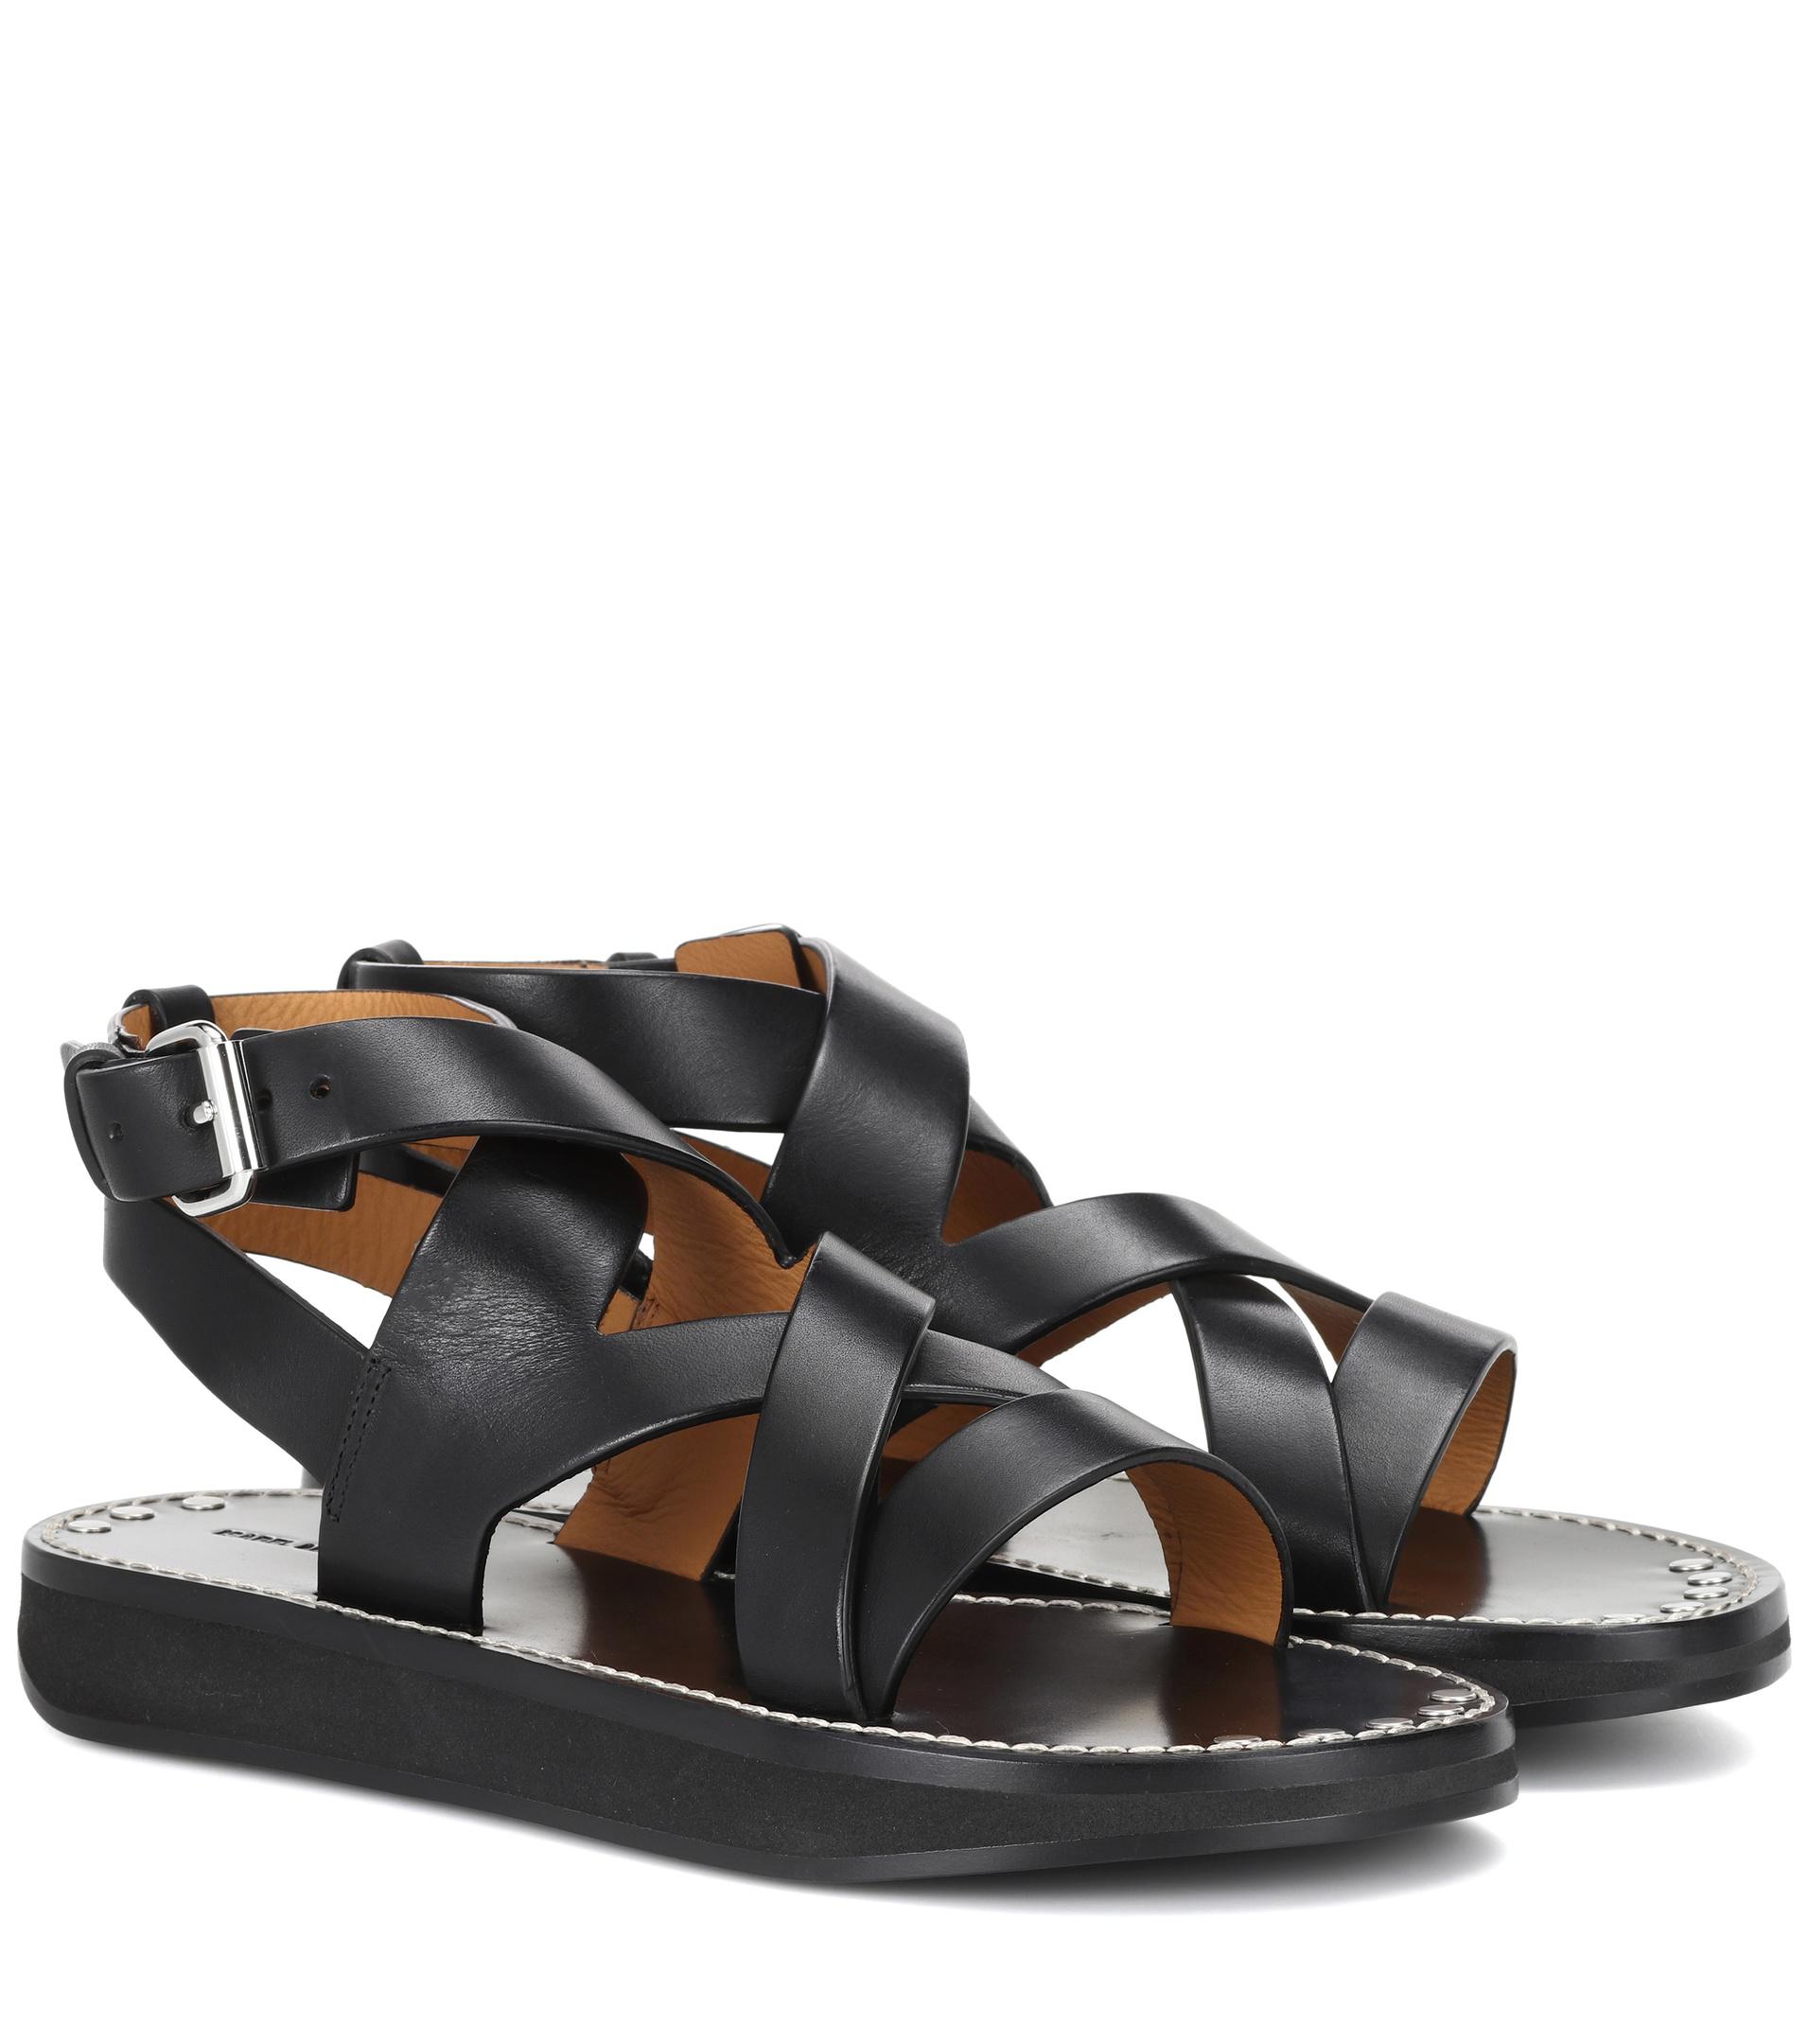 Isabel Marant Noelly Leather Sandals in Black - Lyst